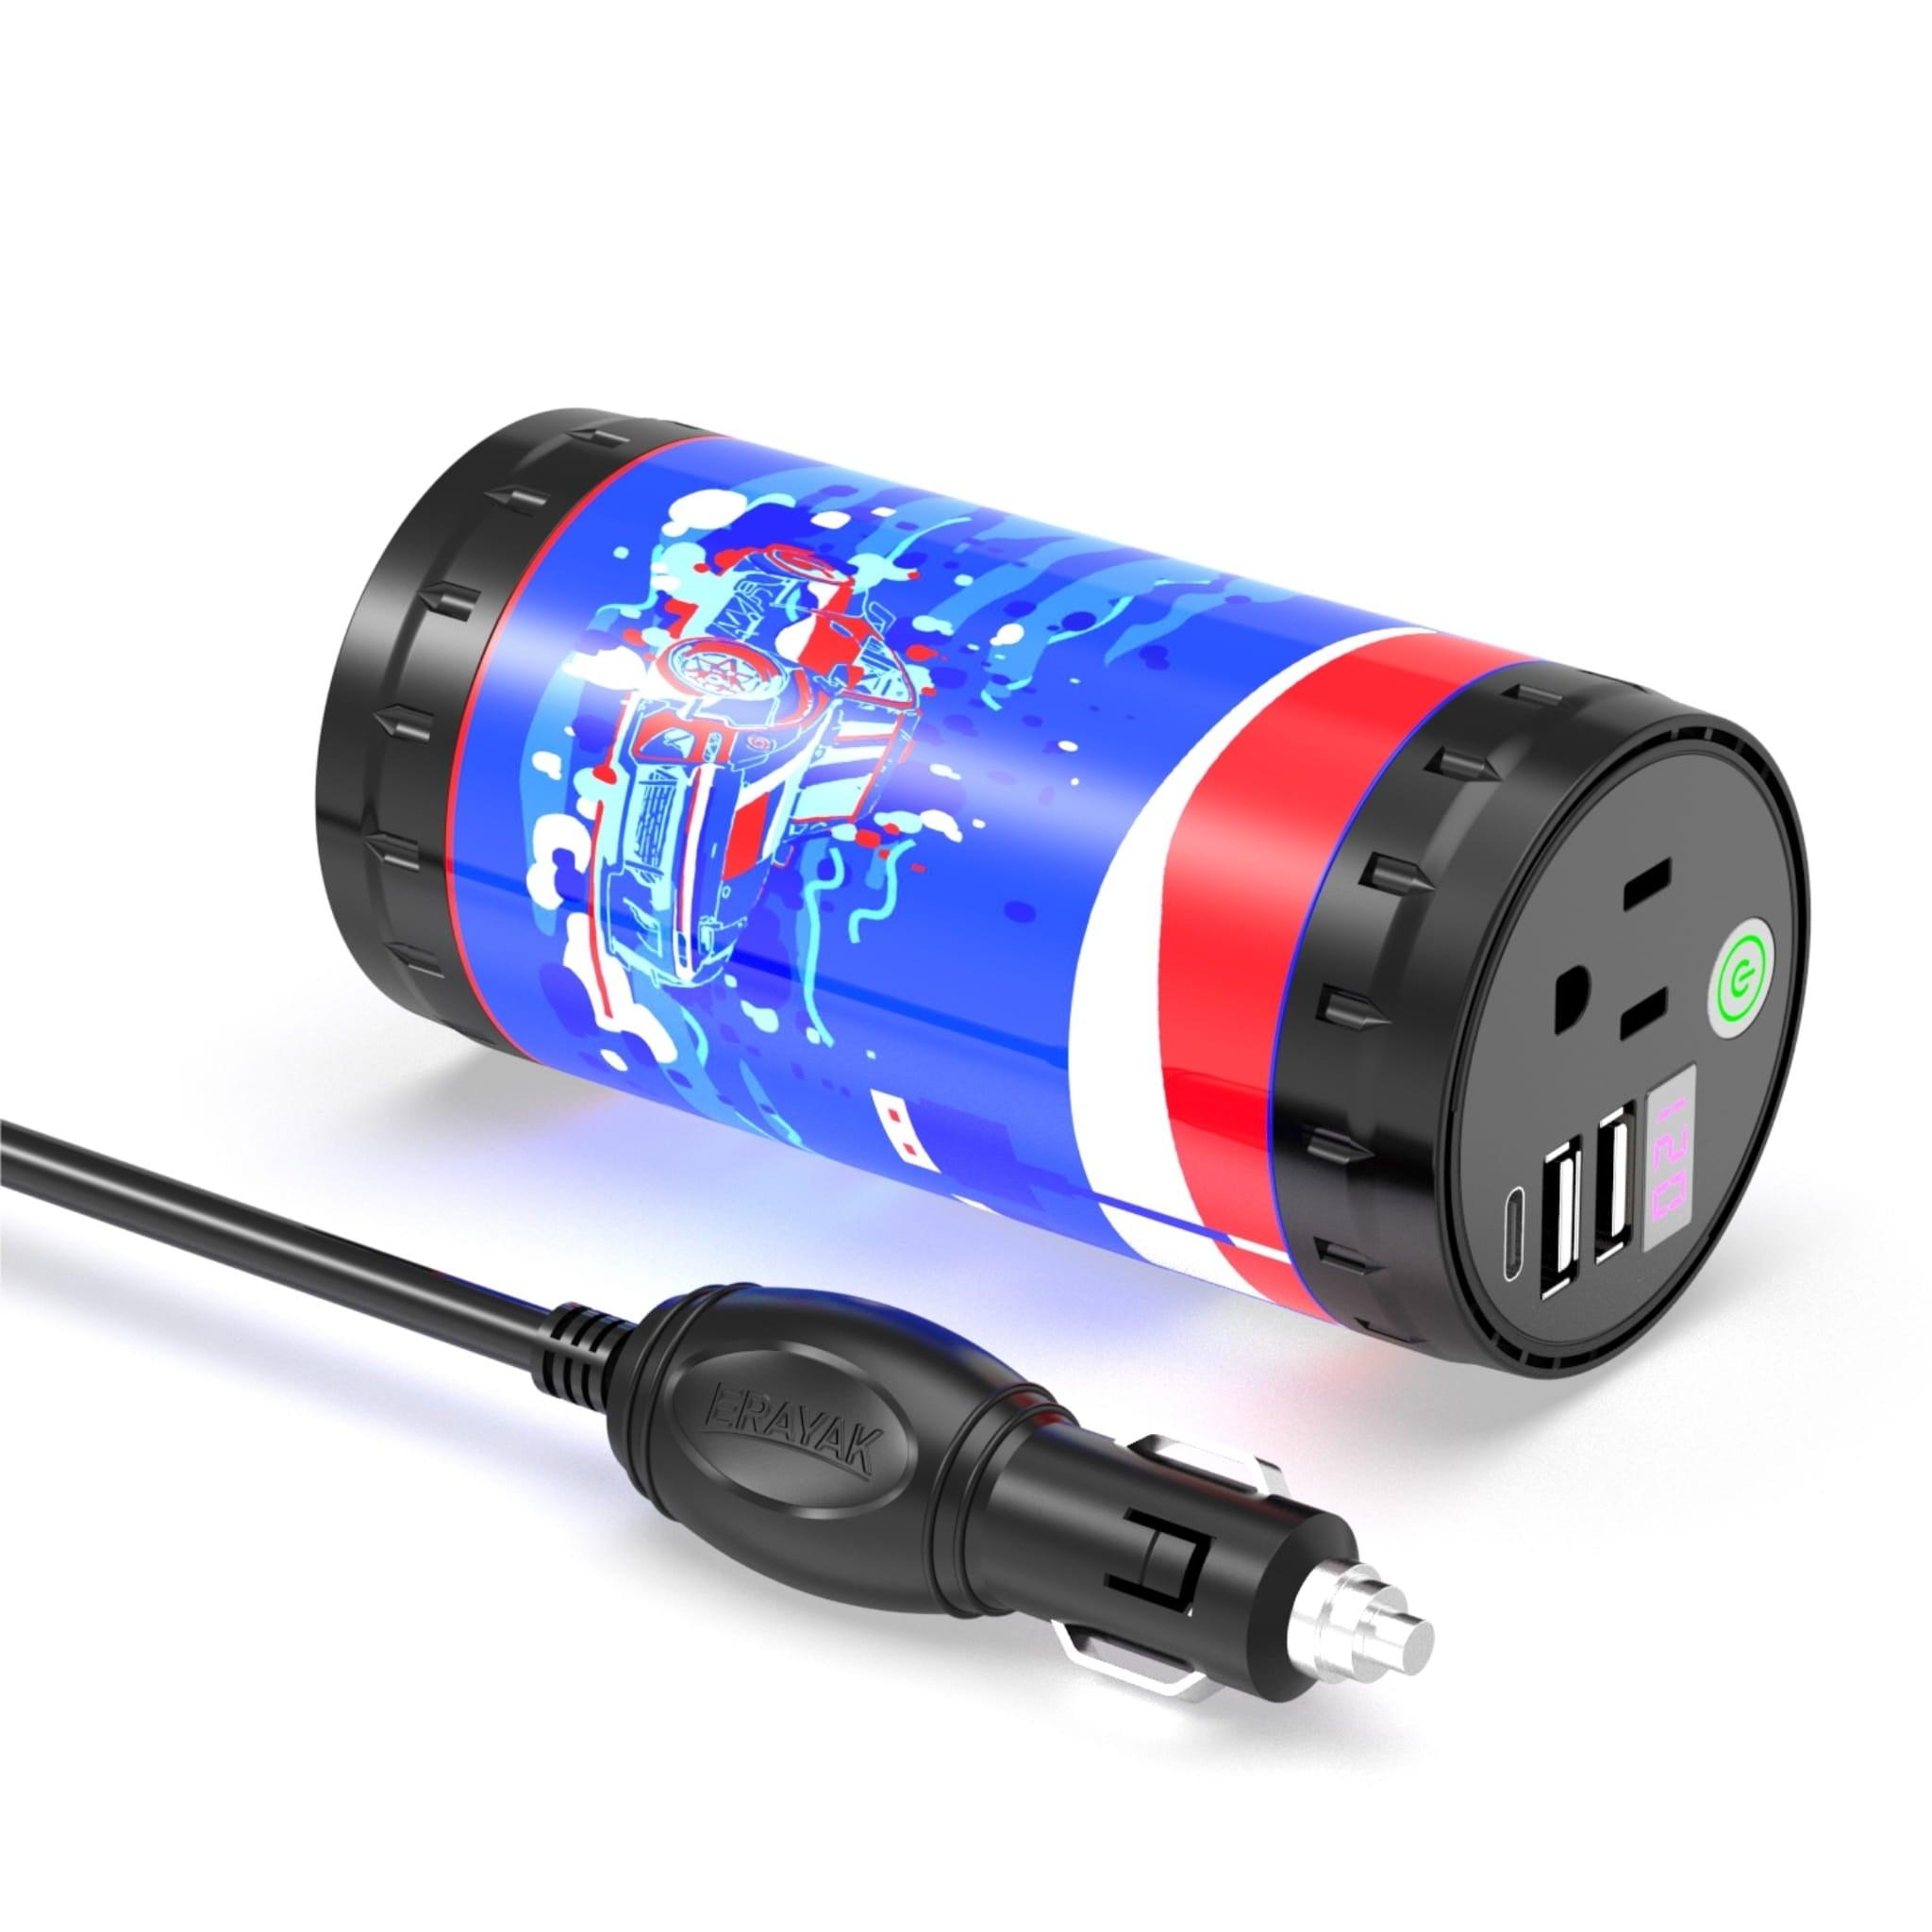 Erayak 200W Car Power Inverter, DC 12V to 120V AC, Car Charger, Adapter with QC 3.0, USB C Ports, for Plug Outlet Converter - Erayak